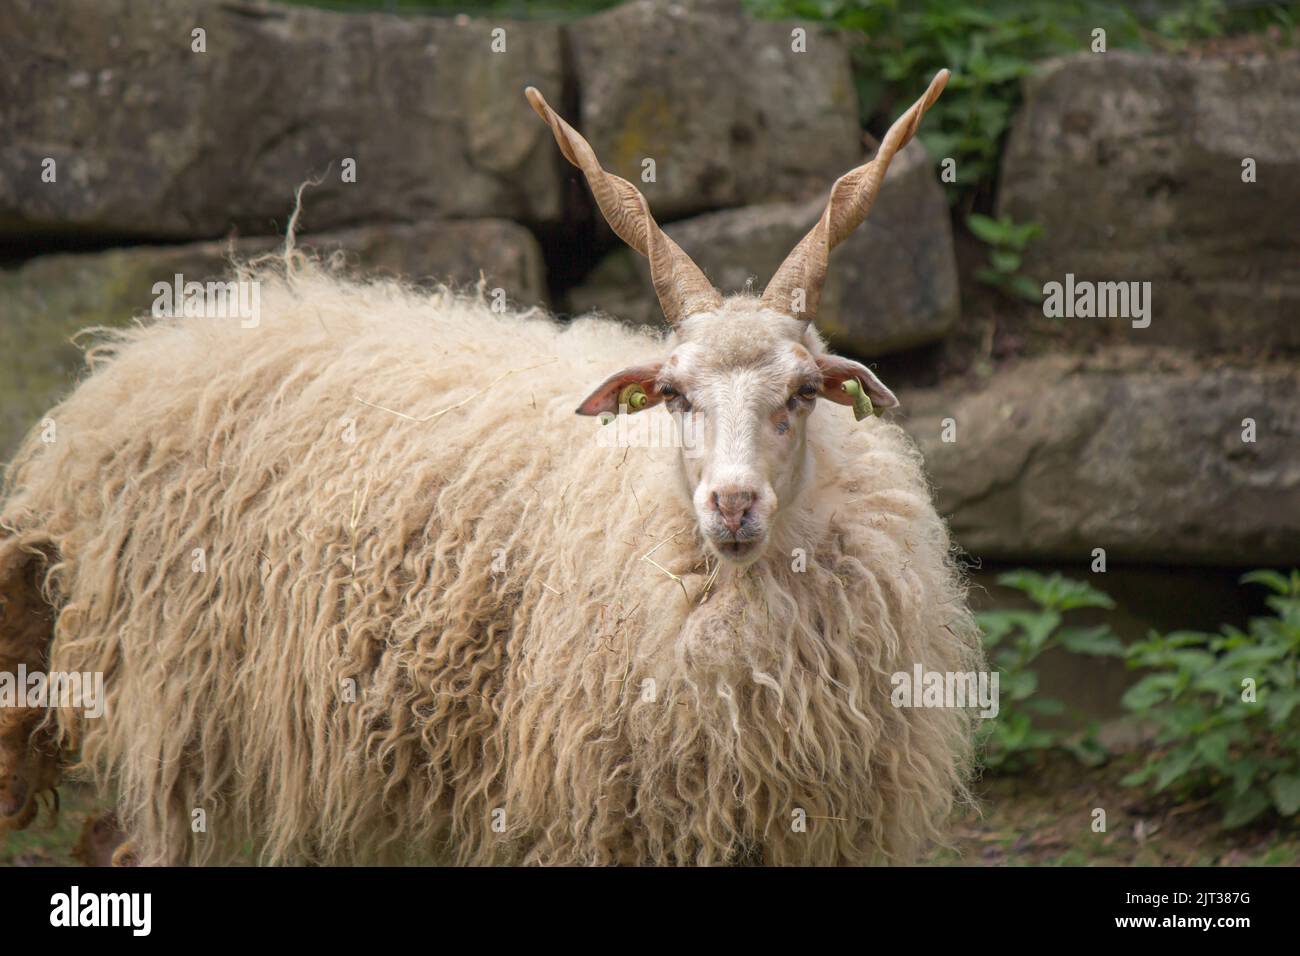 A view of a beautiful Racka sheep in a garden looking at the camera Stock Photo